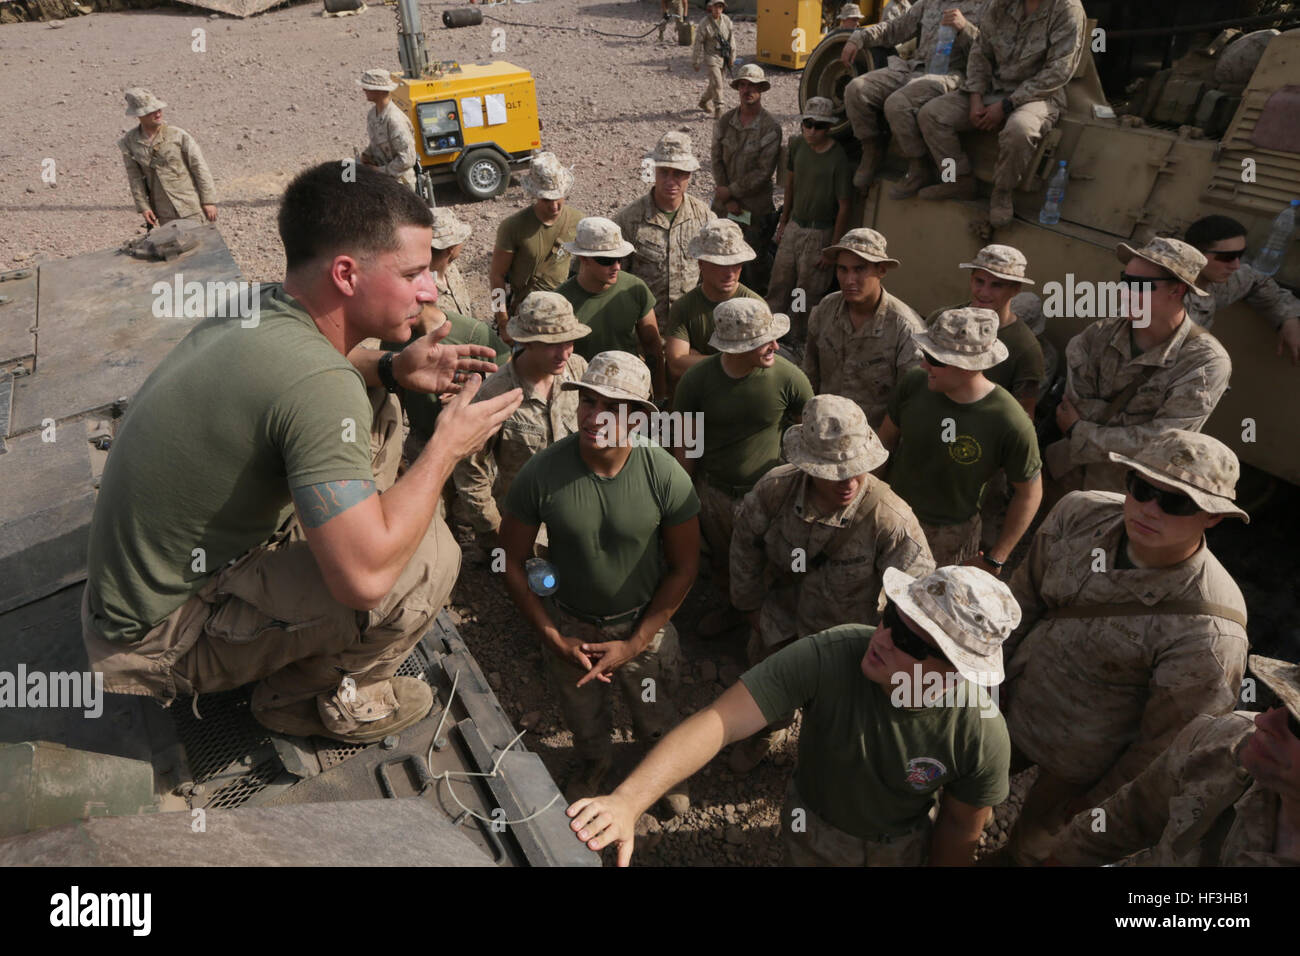 ARTA BEACH, Djibouti (July 24, 2015) U.S. Marine Lance Cpl. Donald Varilek teaches the Marines of Battalion Landing Team 3rd Battalion, 1st Marine Regiment, 15th Marine Expeditionary Unit, about the functions of an M1A1 Abrams tank. Varilek is a tank loader with BLT 3/1, 15th MEU. Elements of the 15th Marine Expeditionary Unit are ashore in Djibouti for sustainment training to maintain and enhance the skills they developed during their pre-deployment training period.  The 15th MEU is currently deployed in support of maritime security operations and theater security cooperation efforts in the U Stock Photo